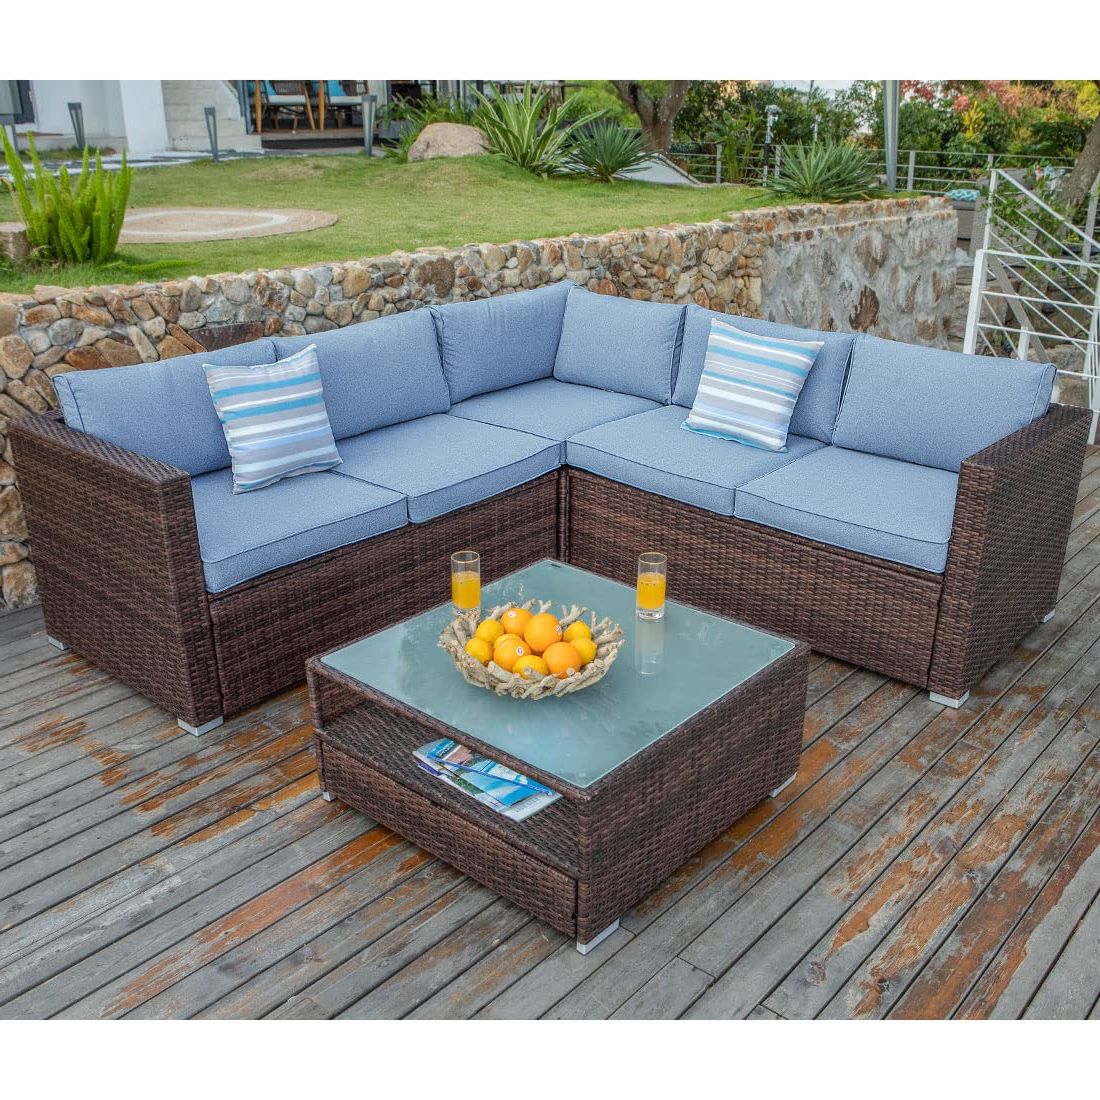 4 Piece Outdoor Wicker Seating Set In Brown Intended For Latest Amazon: Cosiest 4 Piece Outdoor Furniture Set All Weather Brown Wicker  Sectional Sofa W Glass Coffee Table, Heritage Blue Cushions,2 Stripe Woven  Pillows Incl. Waterproof Cover For Garden : Patio, Lawn & Garden (Photo 13 of 15)